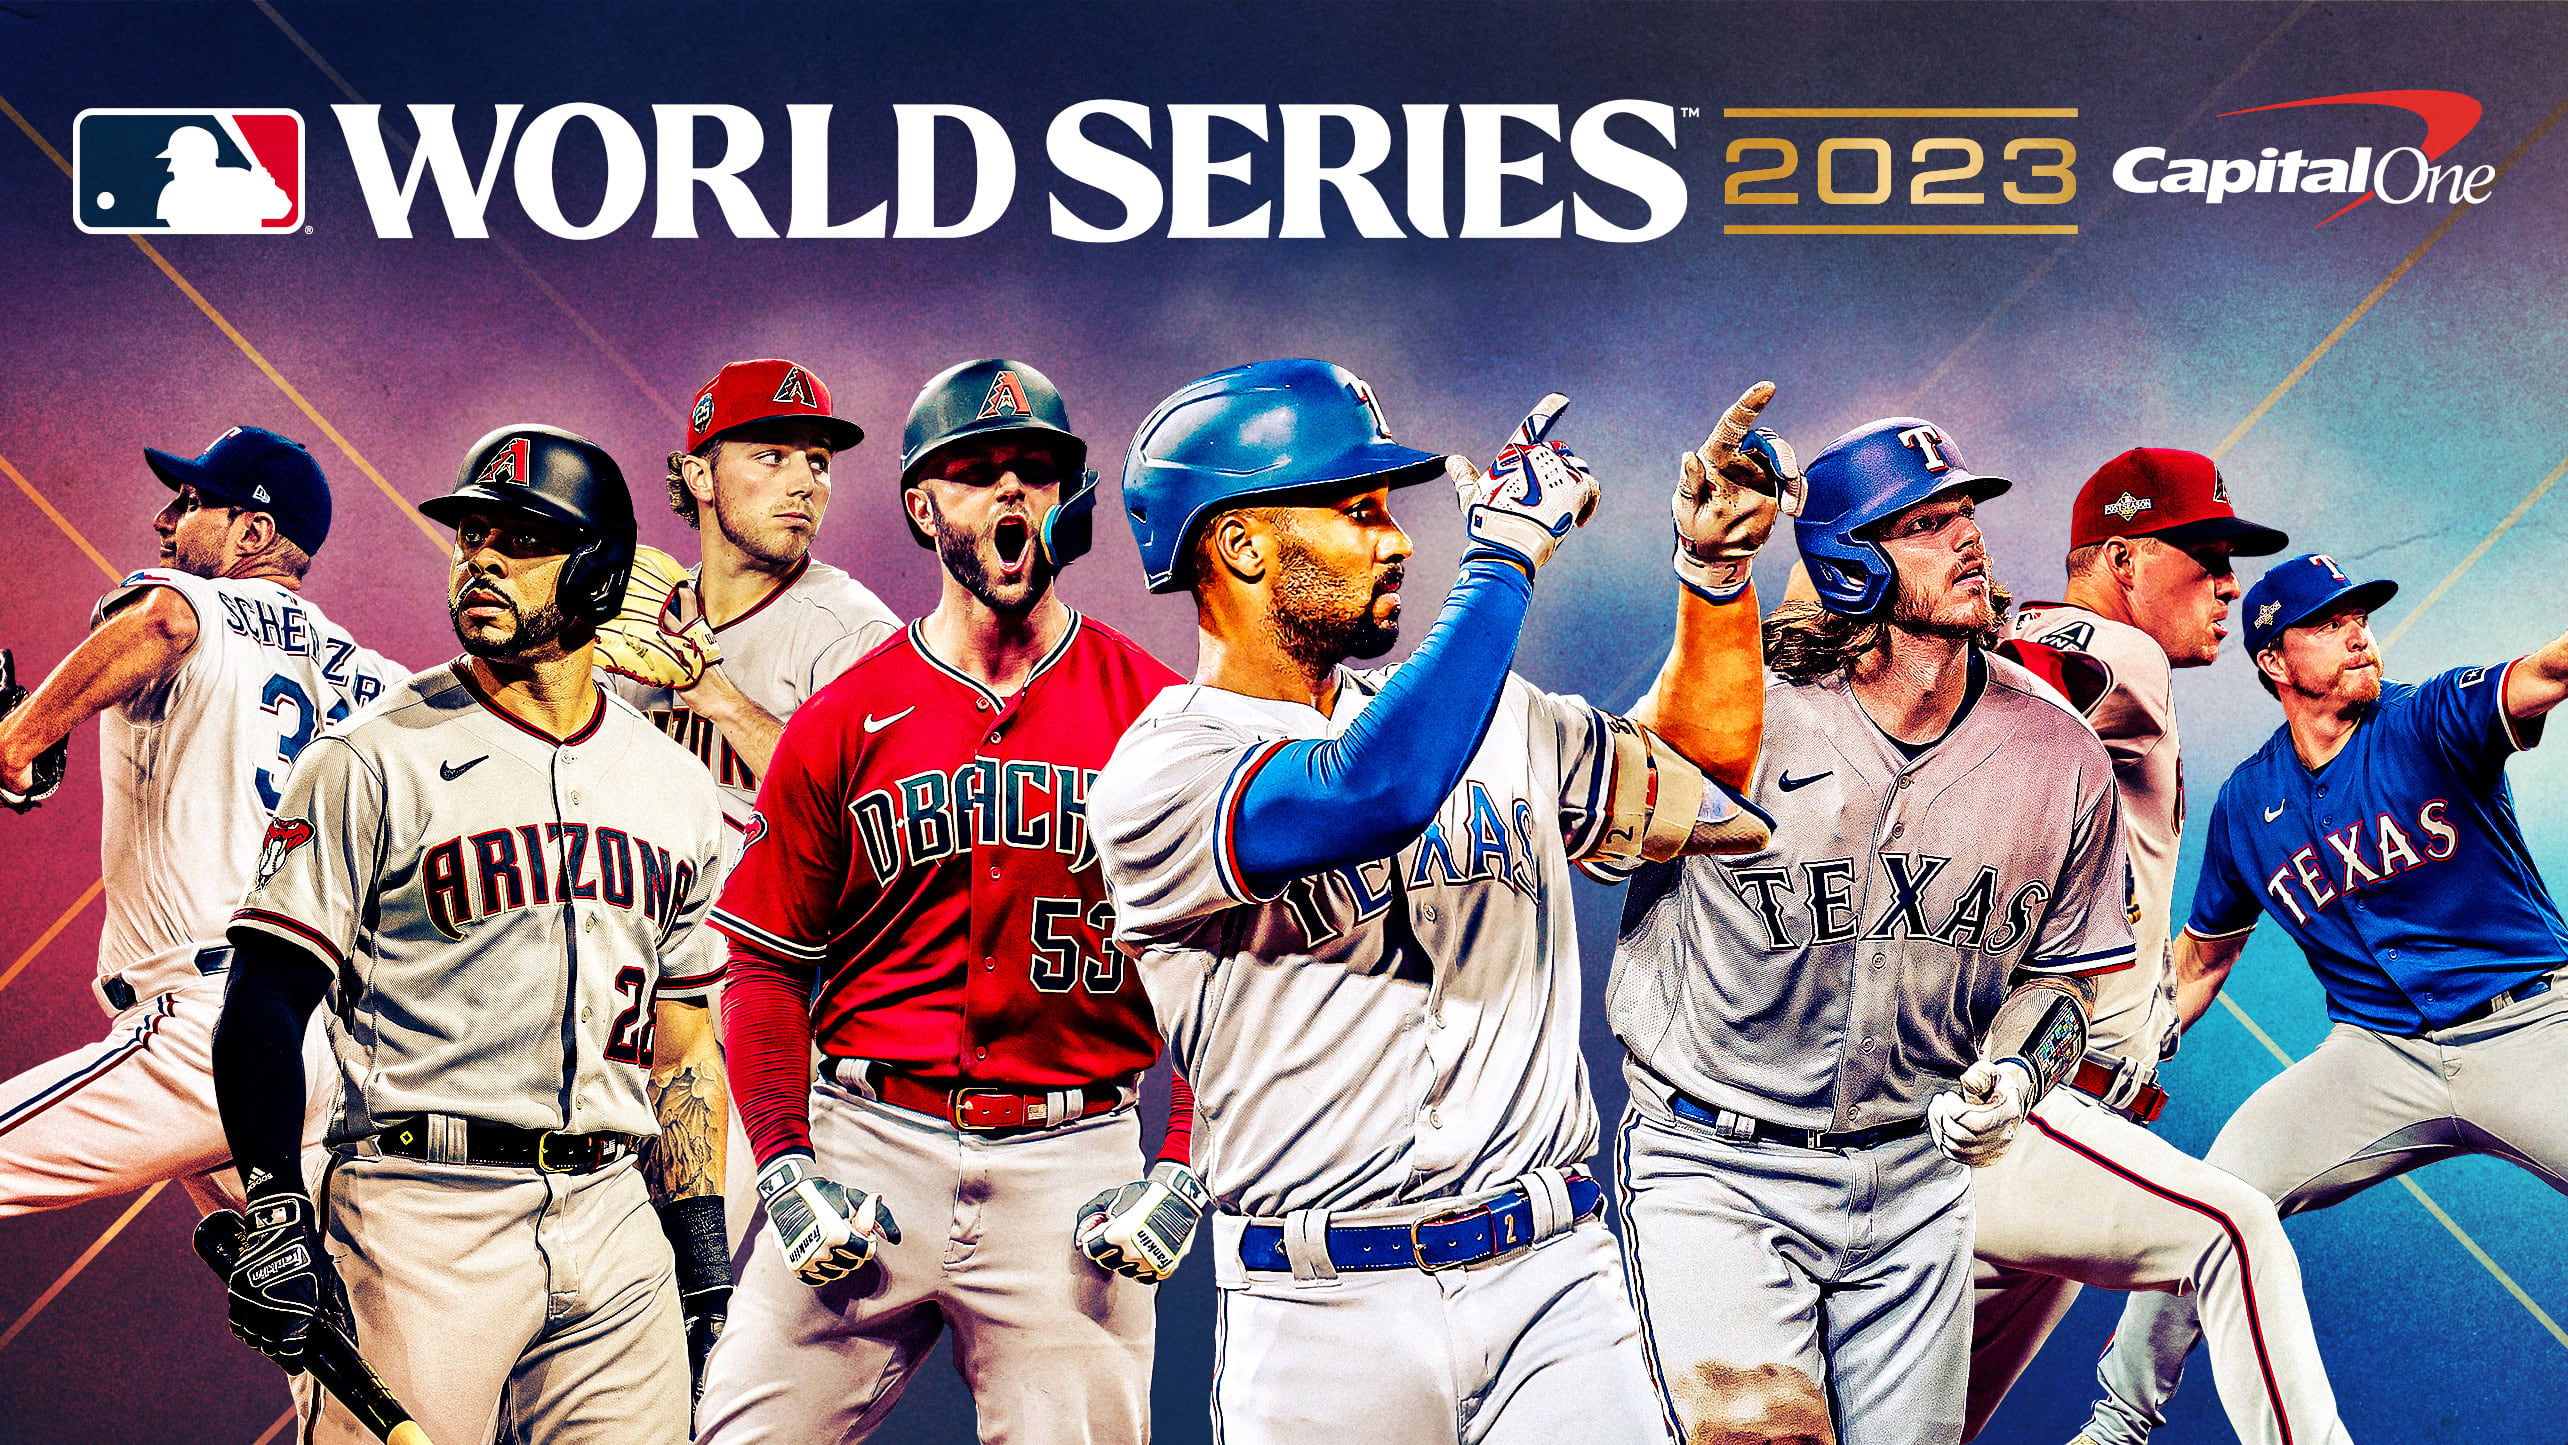 Eight players are pictured below the World Series logo.